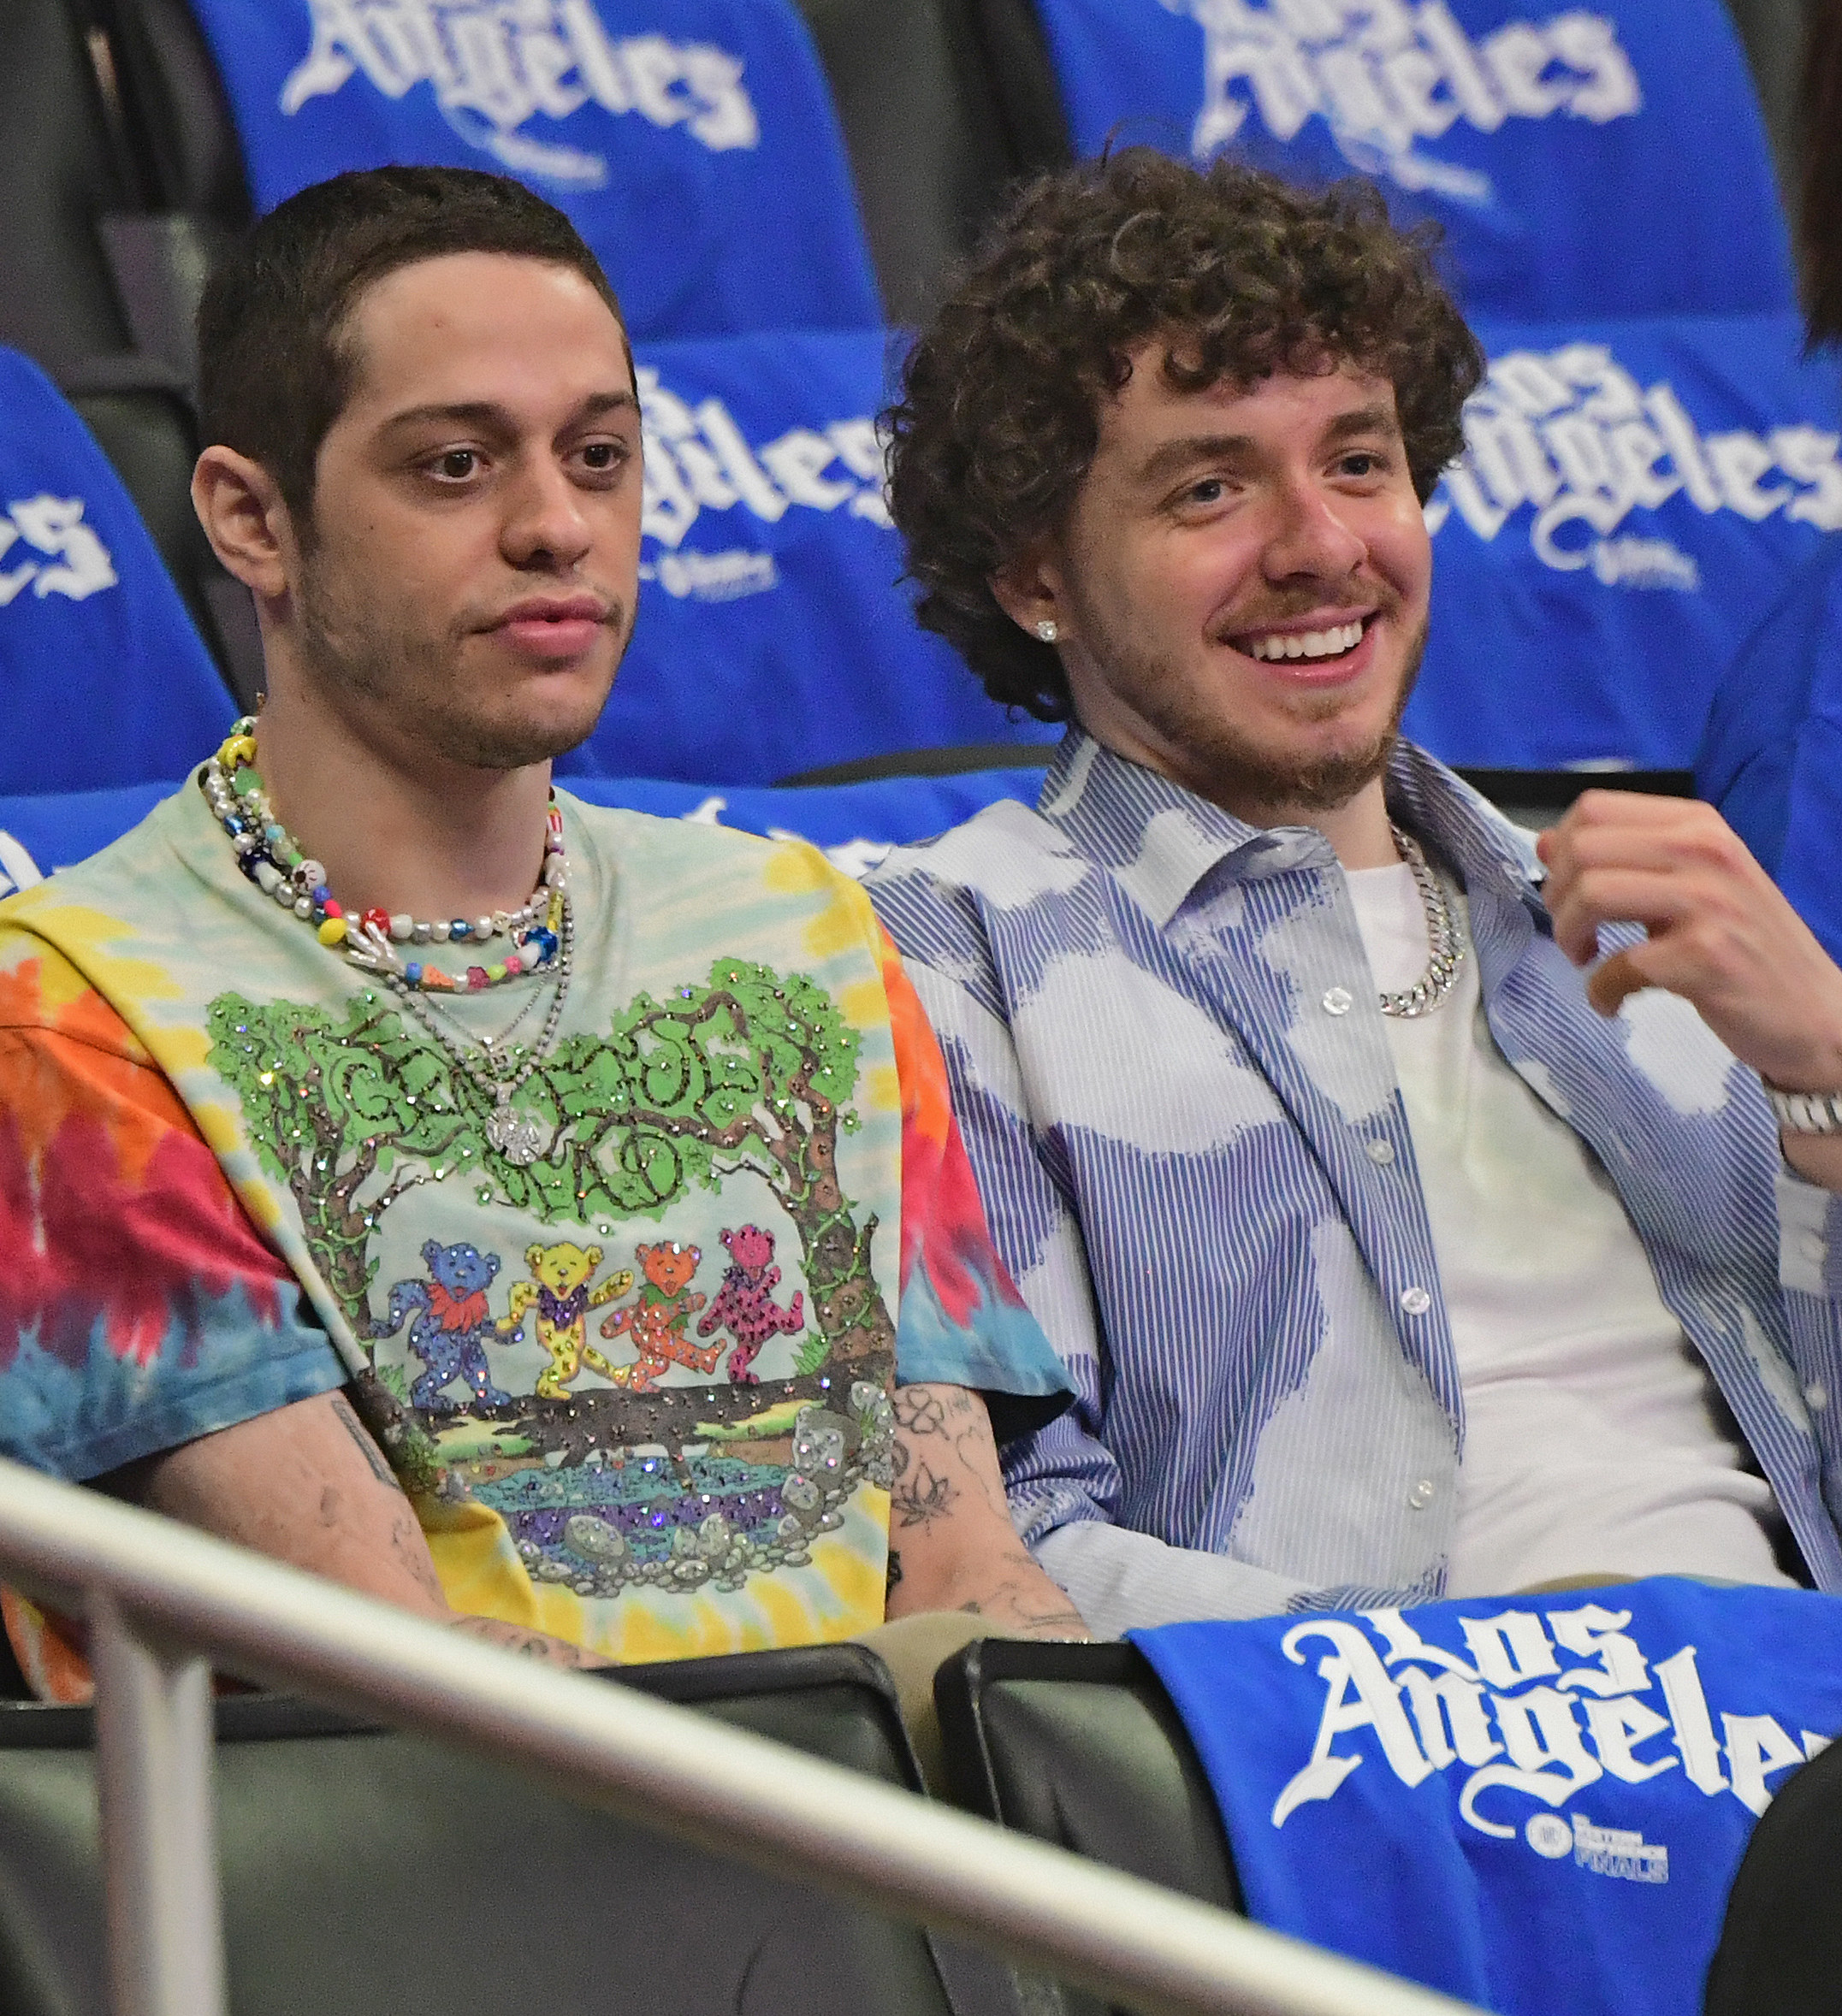 Pete and Jack sitting together at a sports game